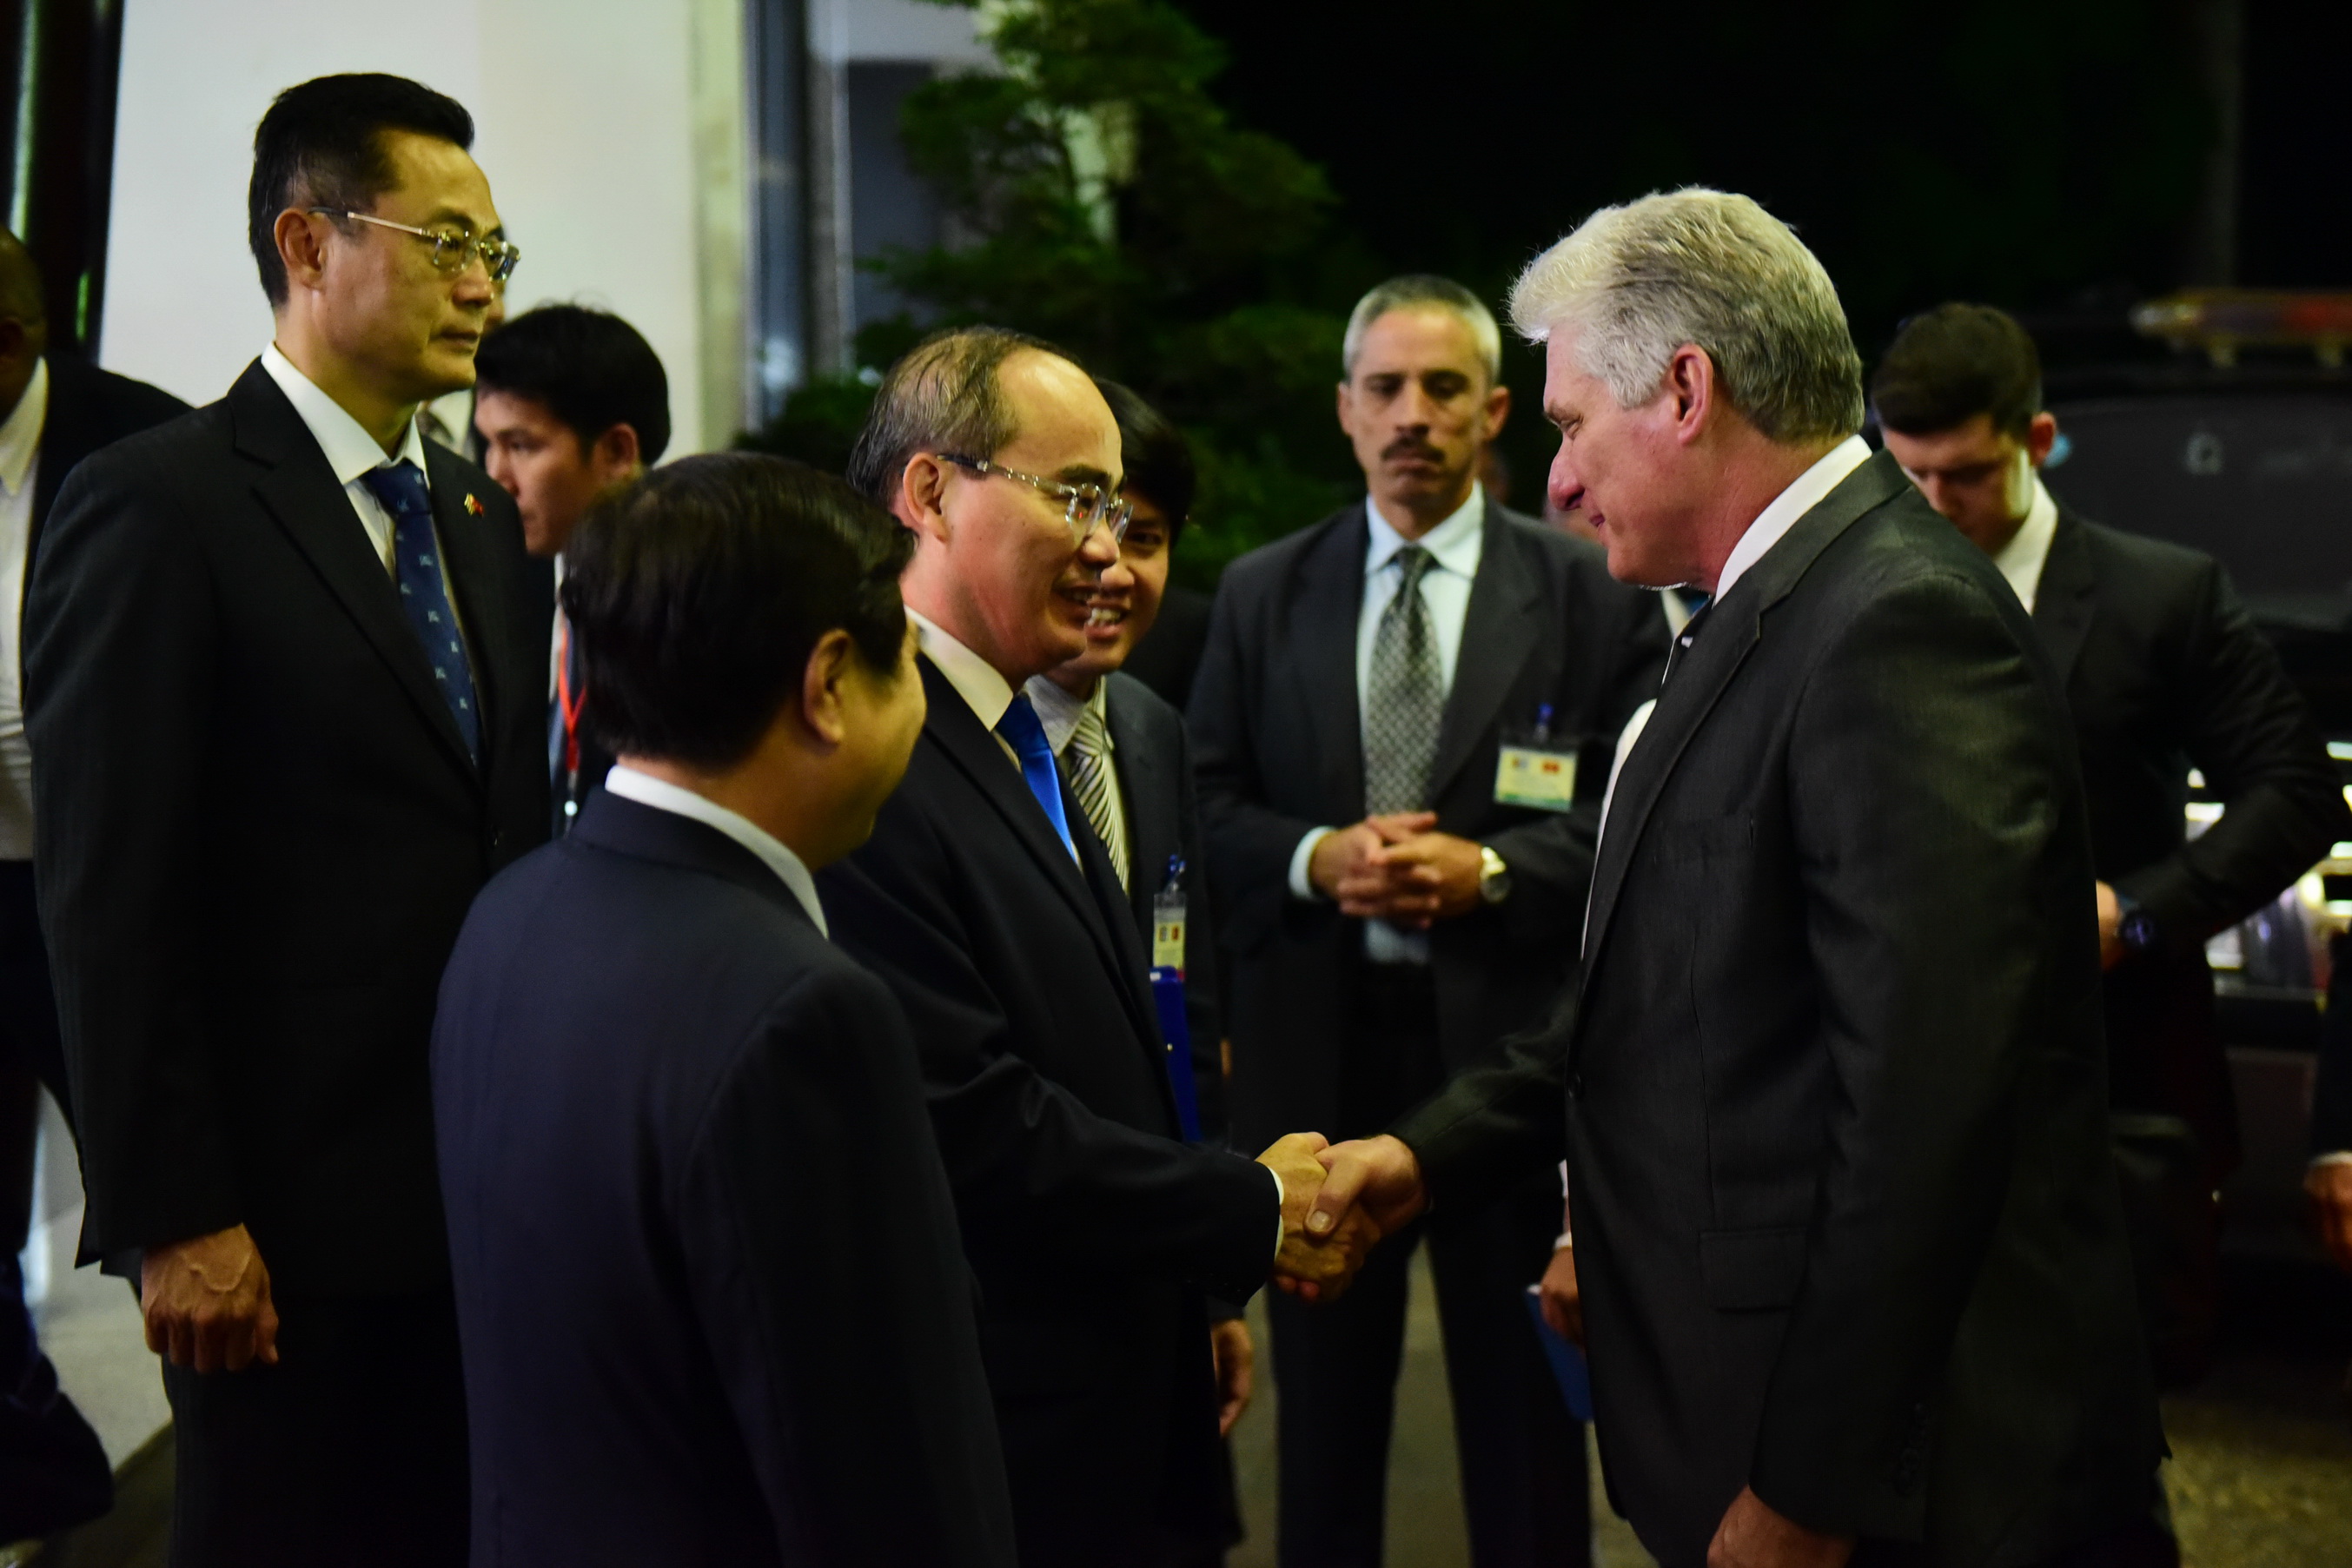 President Miguel Díaz-Canel shakes hands with Secretary of the Ho Chi Minh City Party Committee Nguyen Thien Nhan on November 10, 2018.